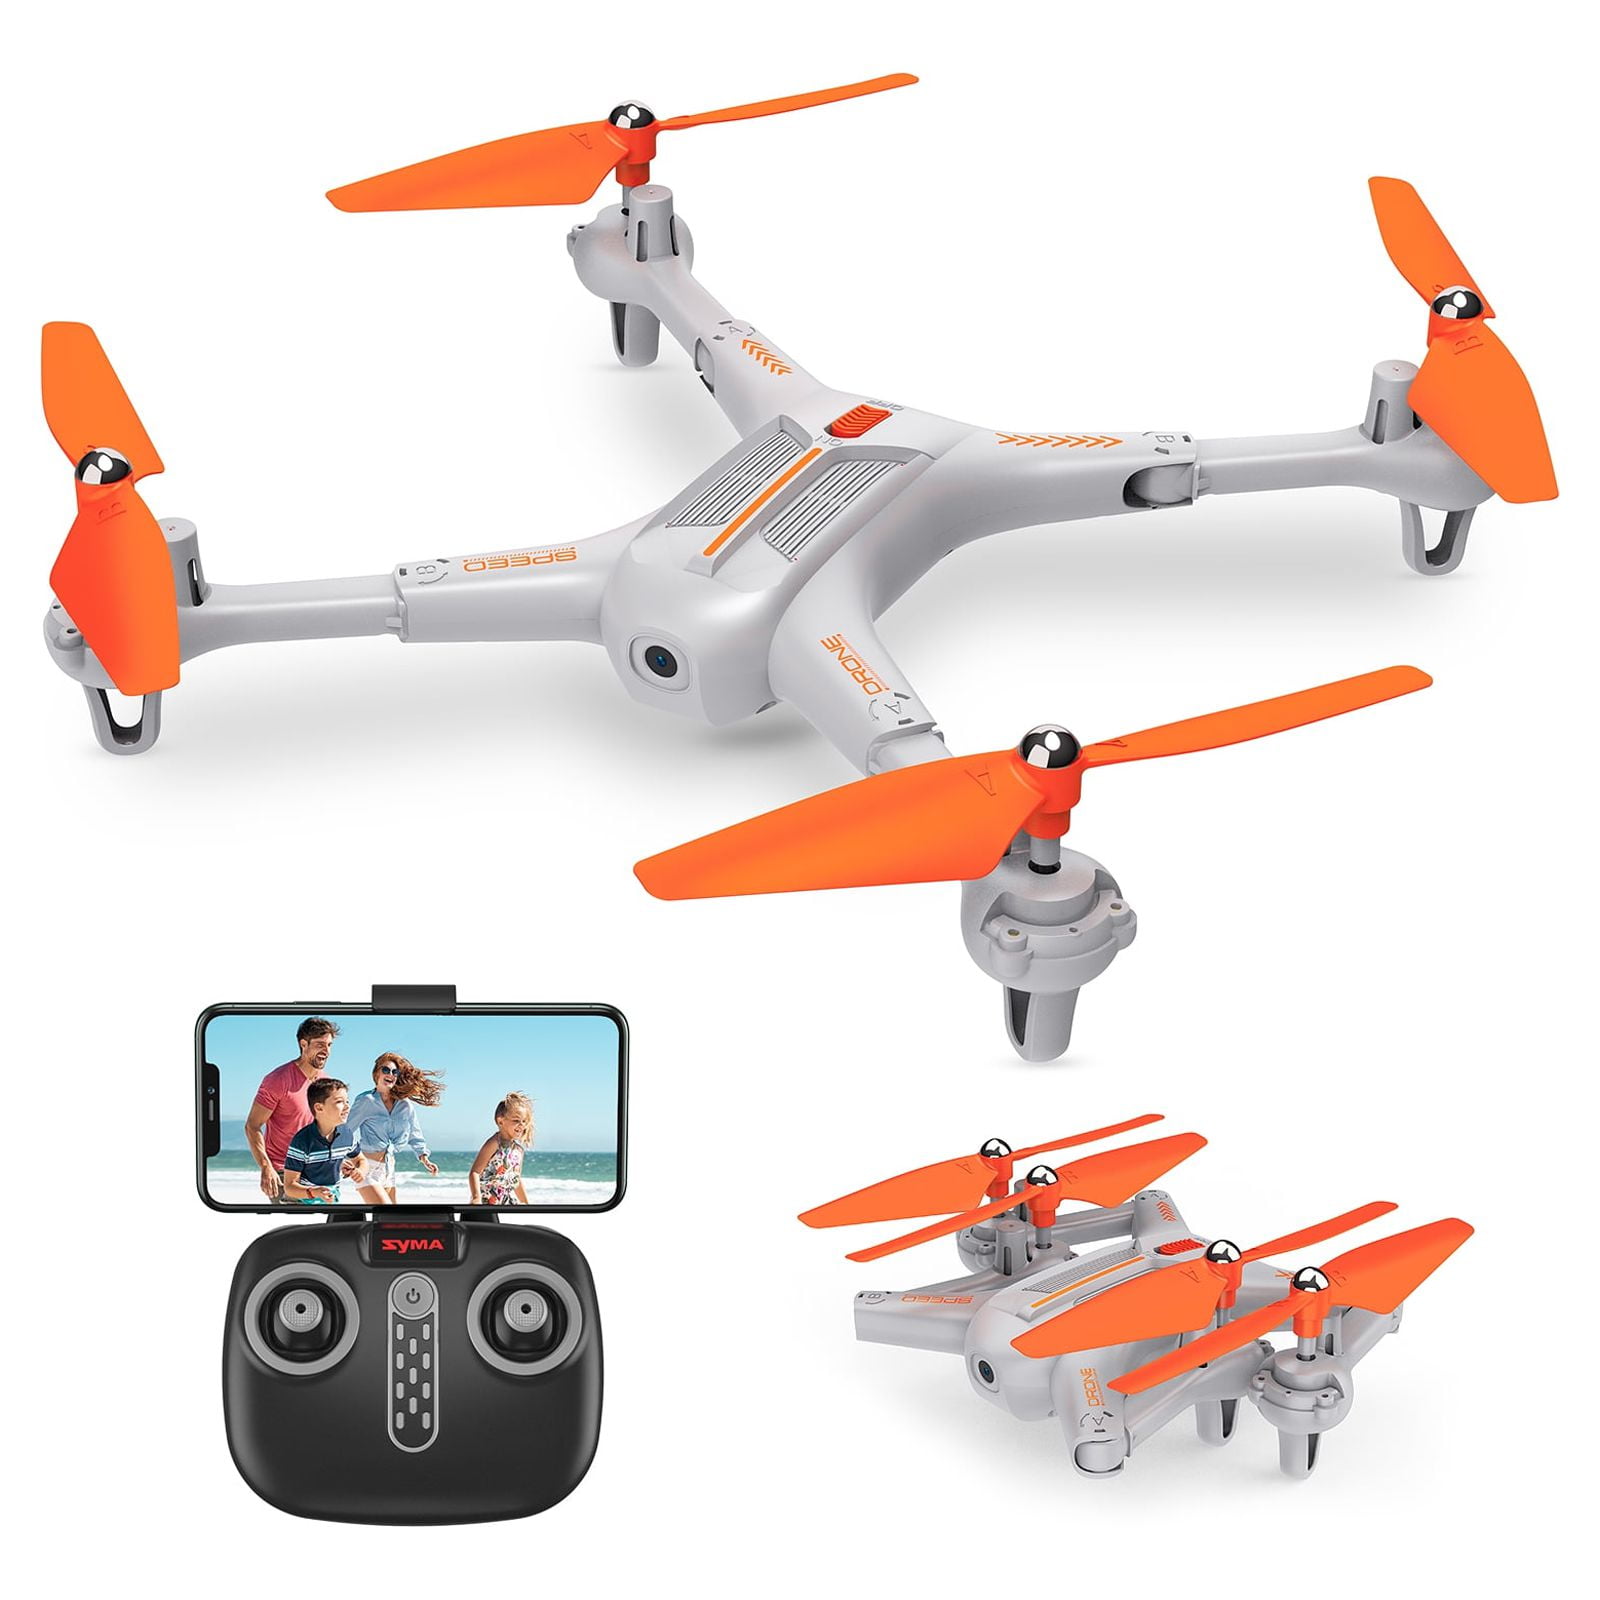 Artsic FPV RC Drone with Camera for Kids Adults Beginners,720P HD Wifi Live  Video Camera Drone, Toys Gifts for Boys Girls with Altitude Hold